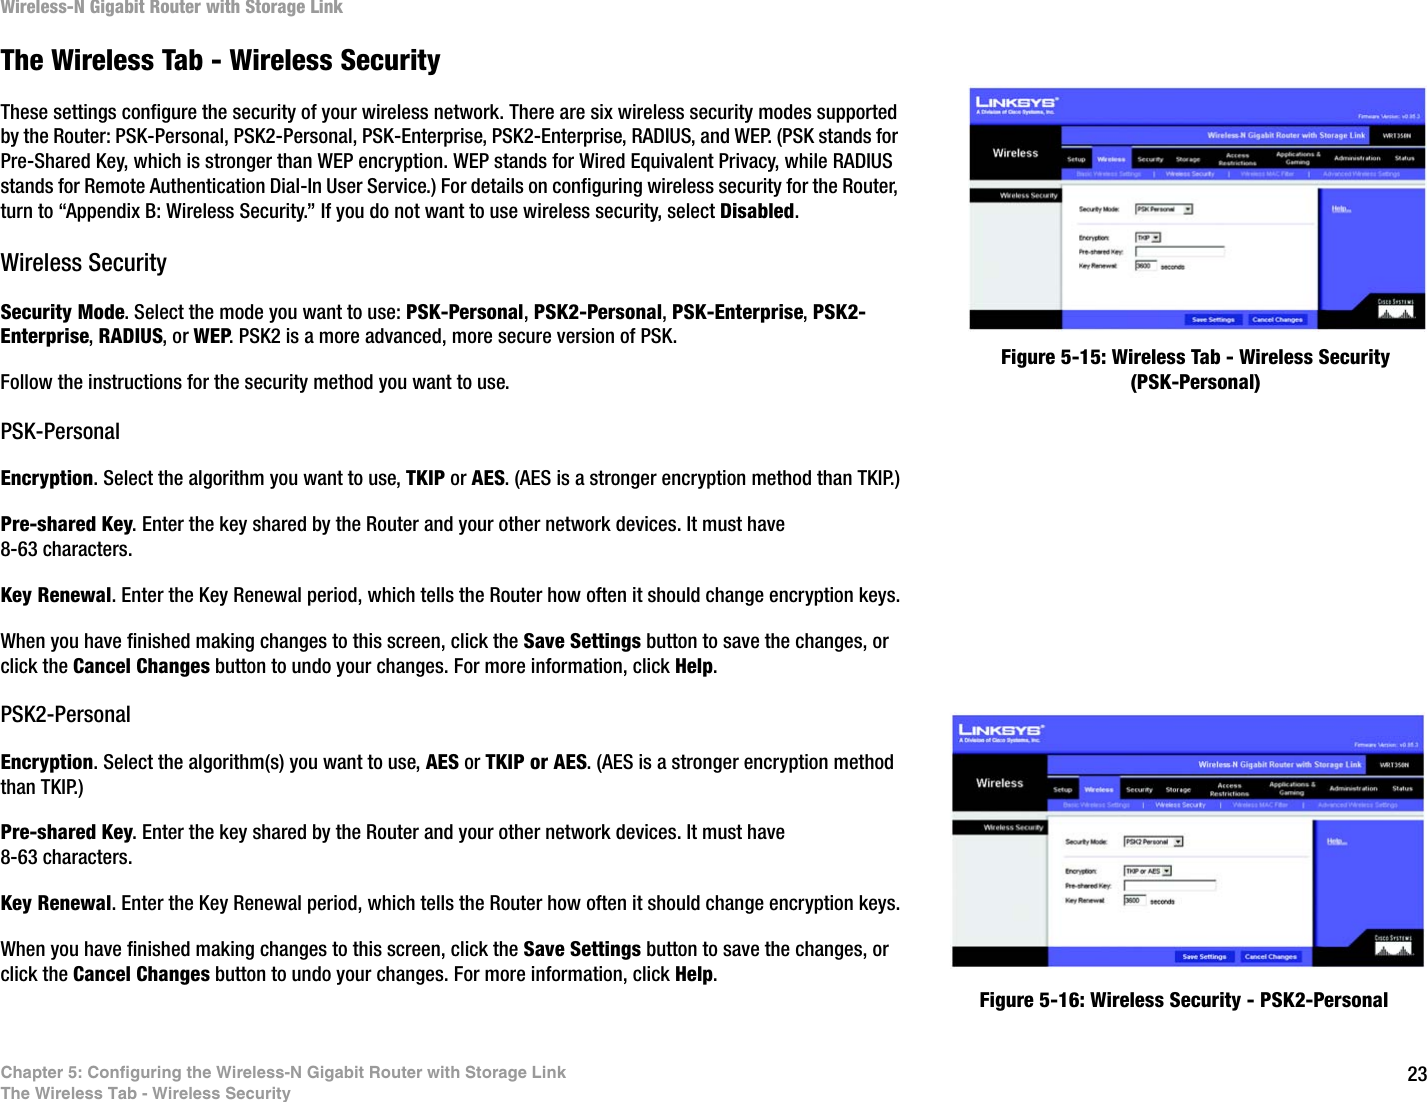 23Chapter 5: Configuring the Wireless-N Gigabit Router with Storage LinkThe Wireless Tab - Wireless SecurityWireless-N Gigabit Router with Storage LinkThe Wireless Tab - Wireless SecurityThese settings configure the security of your wireless network. There are six wireless security modes supported by the Router: PSK-Personal, PSK2-Personal, PSK-Enterprise, PSK2-Enterprise, RADIUS, and WEP. (PSK stands for Pre-Shared Key, which is stronger than WEP encryption. WEP stands for Wired Equivalent Privacy, while RADIUS stands for Remote Authentication Dial-In User Service.) For details on configuring wireless security for the Router, turn to “Appendix B: Wireless Security.” If you do not want to use wireless security, select Disabled.Wireless SecuritySecurity Mode. Select the mode you want to use: PSK-Personal, PSK2-Personal, PSK-Enterprise, PSK2-Enterprise, RADIUS, or WEP. PSK2 is a more advanced, more secure version of PSK.Follow the instructions for the security method you want to use. PSK-PersonalEncryption. Select the algorithm you want to use, TKIP or AES. (AES is a stronger encryption method than TKIP.)Pre-shared Key. Enter the key shared by the Router and your other network devices. It must have 8-63 characters.Key Renewal. Enter the Key Renewal period, which tells the Router how often it should change encryption keys.When you have finished making changes to this screen, click the Save Settings button to save the changes, or click the Cancel Changes button to undo your changes. For more information, click Help.PSK2-PersonalEncryption. Select the algorithm(s) you want to use, AES or TKIP or AES. (AES is a stronger encryption method than TKIP.)Pre-shared Key. Enter the key shared by the Router and your other network devices. It must have 8-63 characters.Key Renewal. Enter the Key Renewal period, which tells the Router how often it should change encryption keys.When you have finished making changes to this screen, click the Save Settings button to save the changes, or click the Cancel Changes button to undo your changes. For more information, click Help.Figure 5-15: Wireless Tab - Wireless Security (PSK-Personal)Figure 5-16: Wireless Security - PSK2-Personal